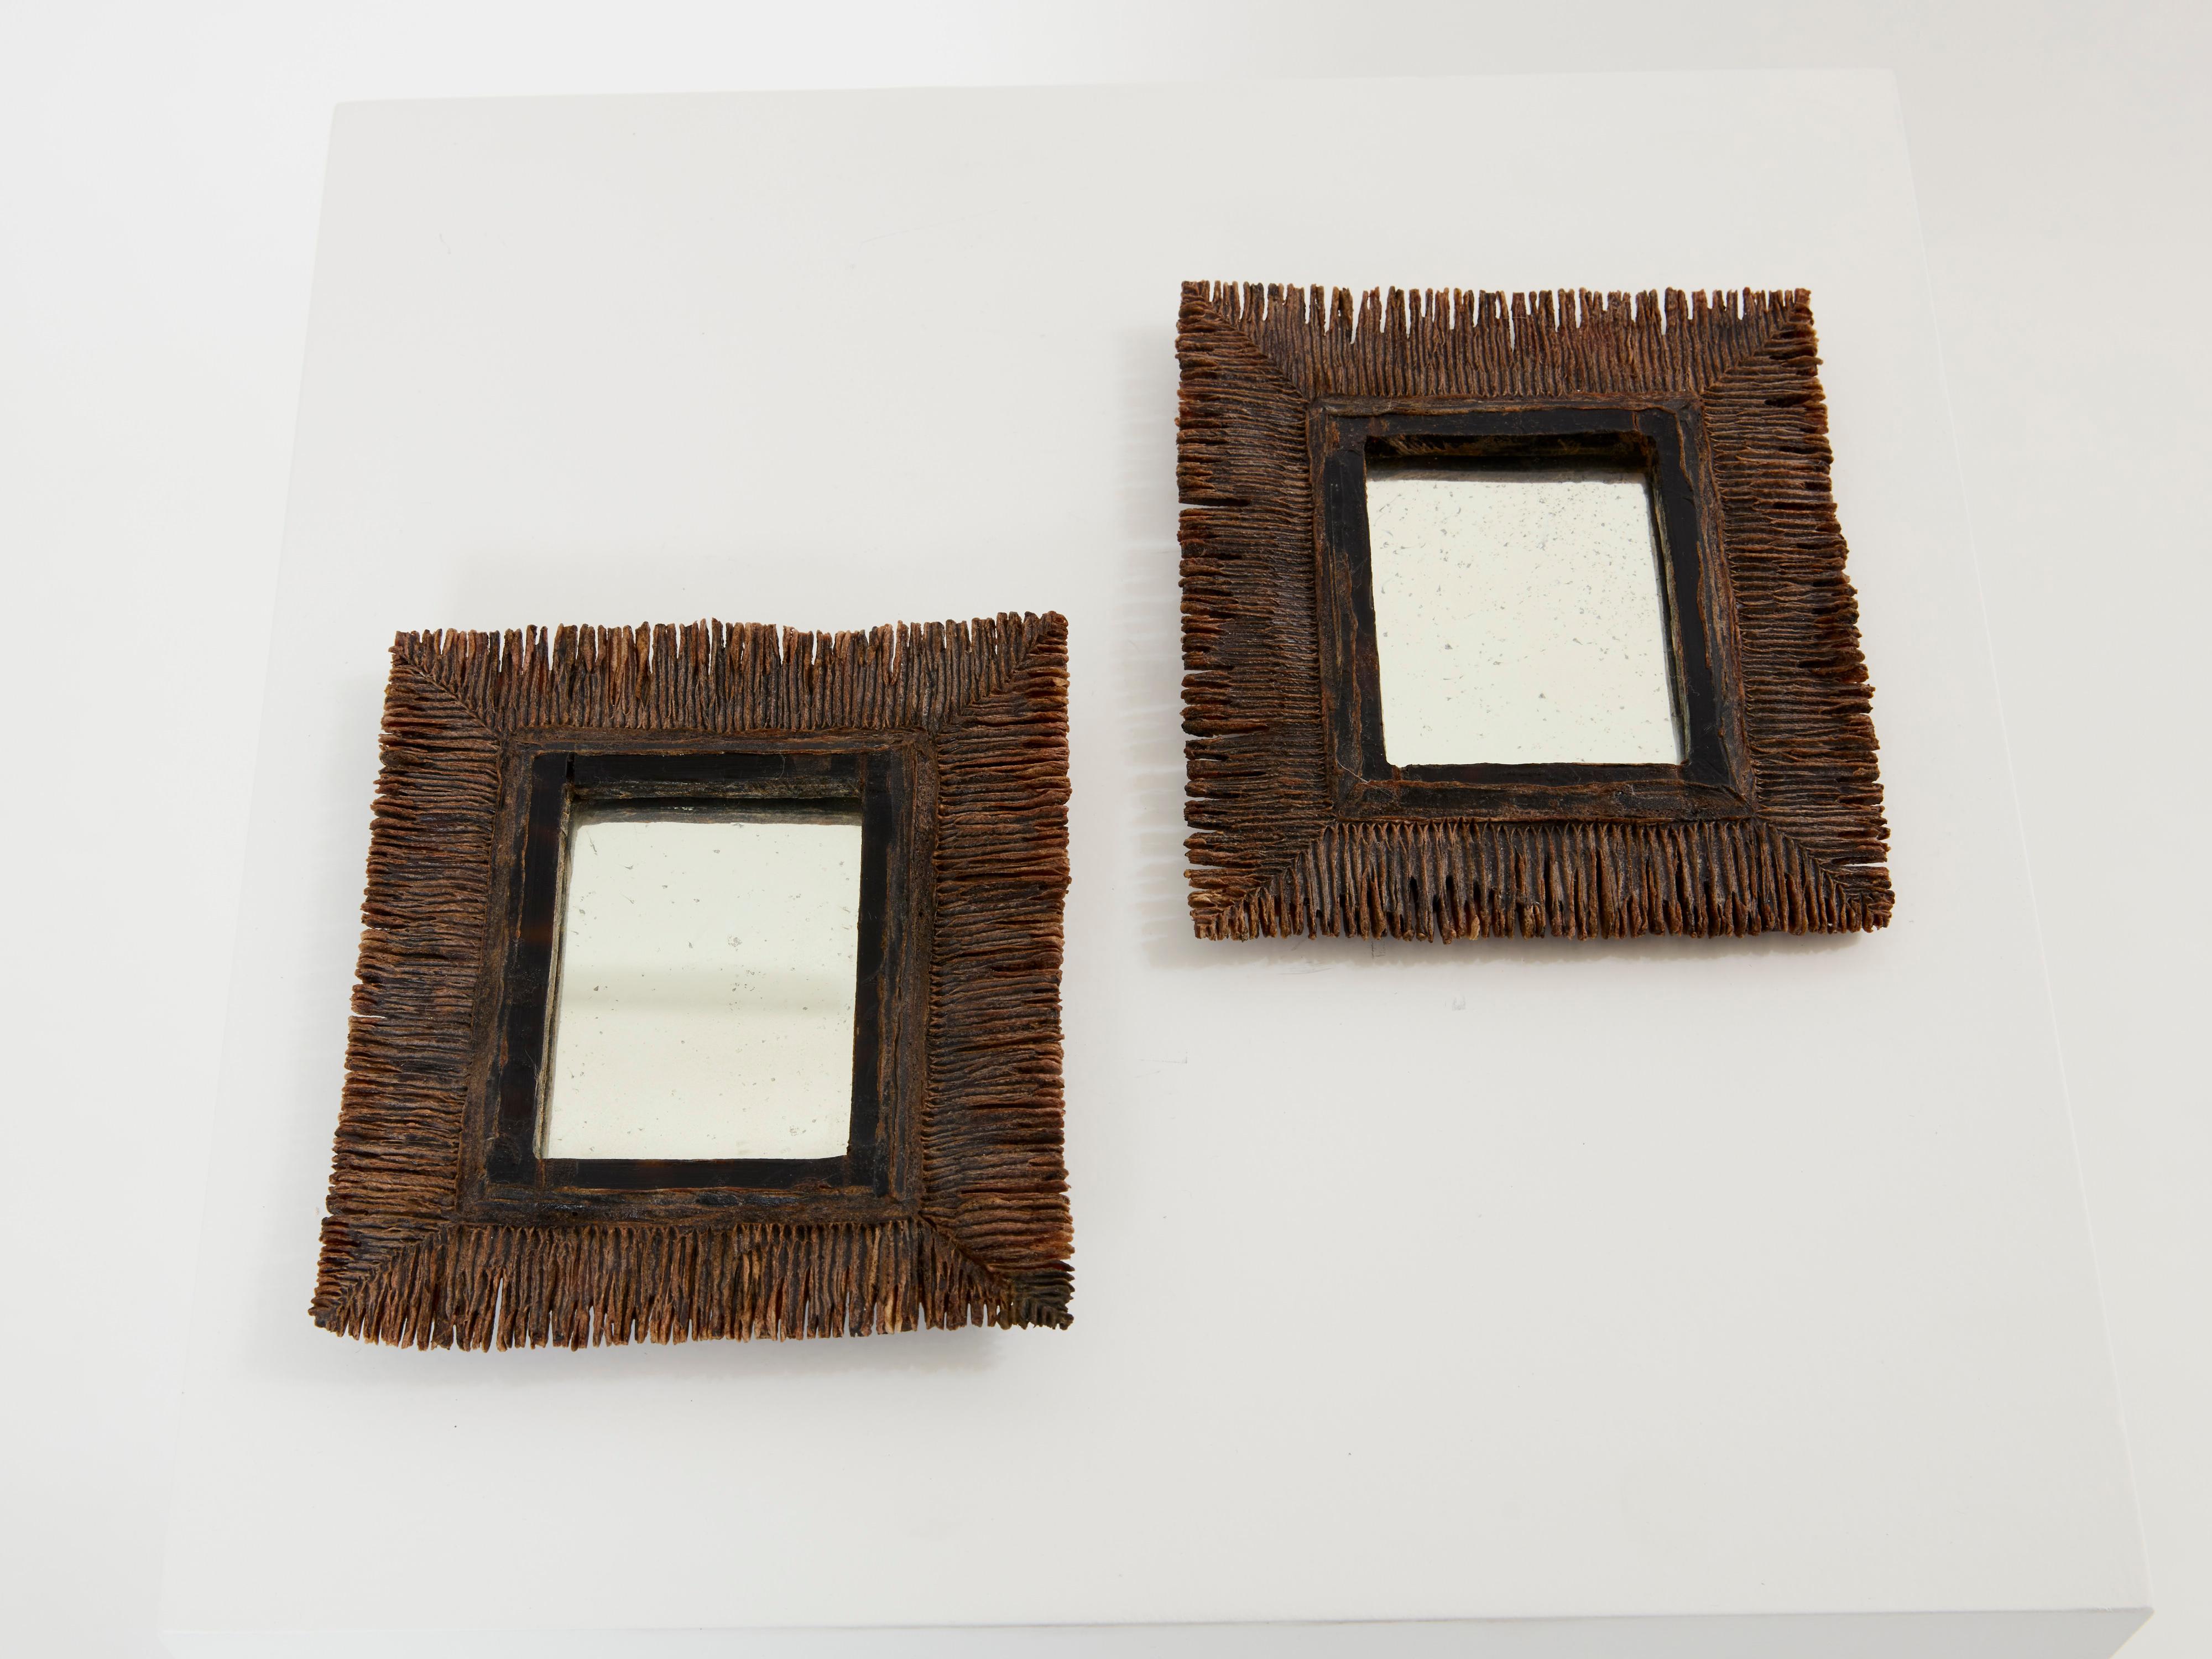 Rare set of two “déchiquetée” talosel resin mirrors made by Line Vautrin in the mid-1960s. They are both untouched, with their original mirrors. The talosel resin has been patinated in rich shades of brown. They both measure Width 4.53 inches x